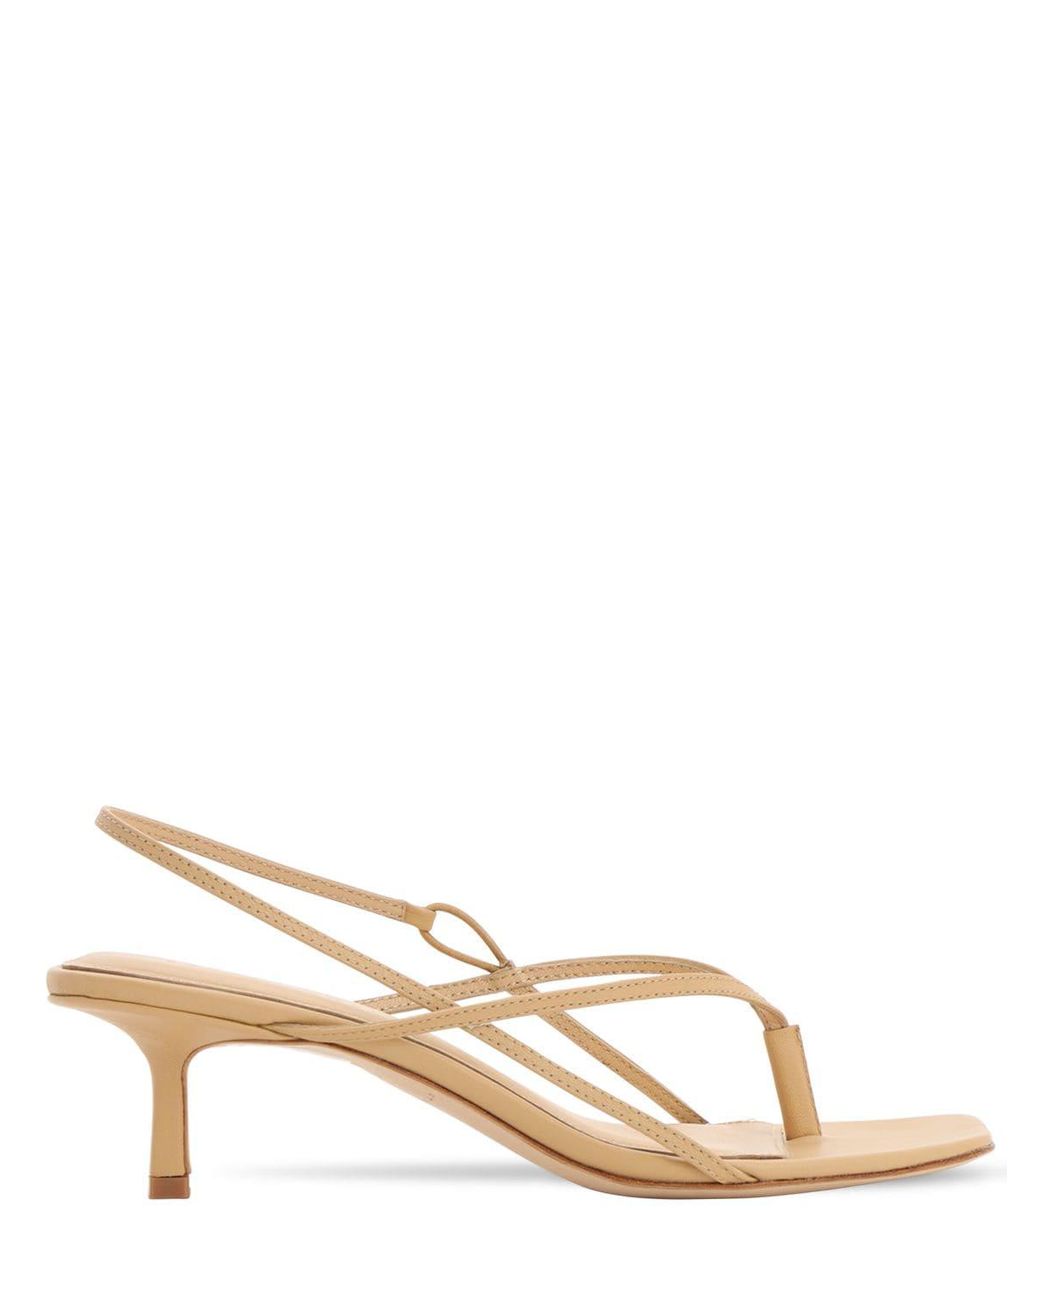 STUDIO AMELIA 50mm Leather Thong Sling Back Sandals in Natural | Lyst